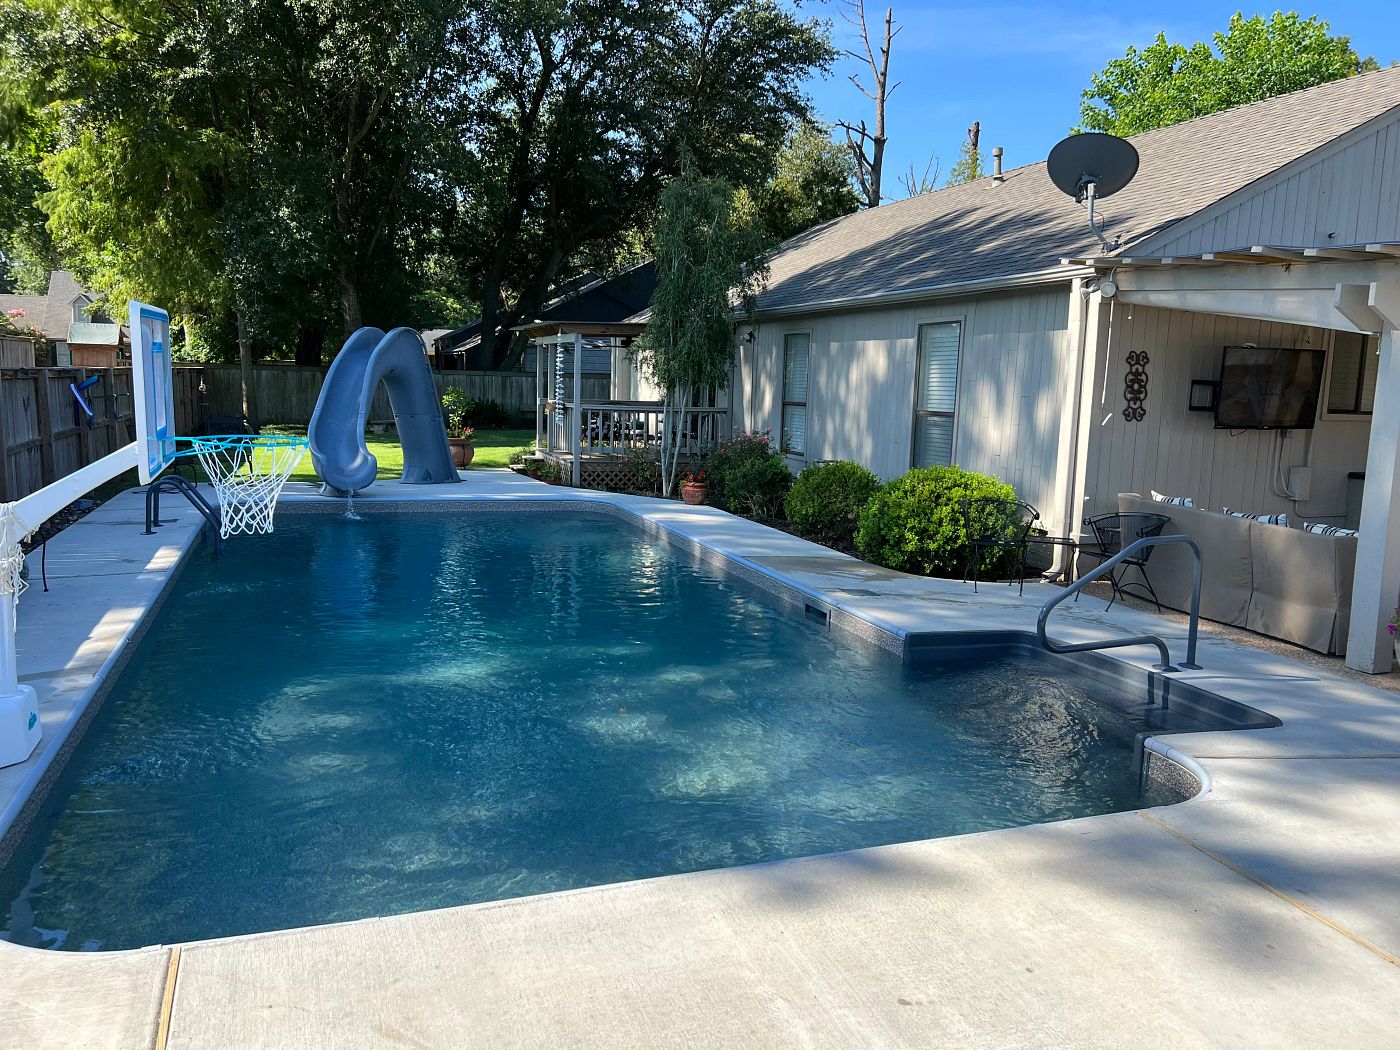 vinyl liner pool in small southern backyard